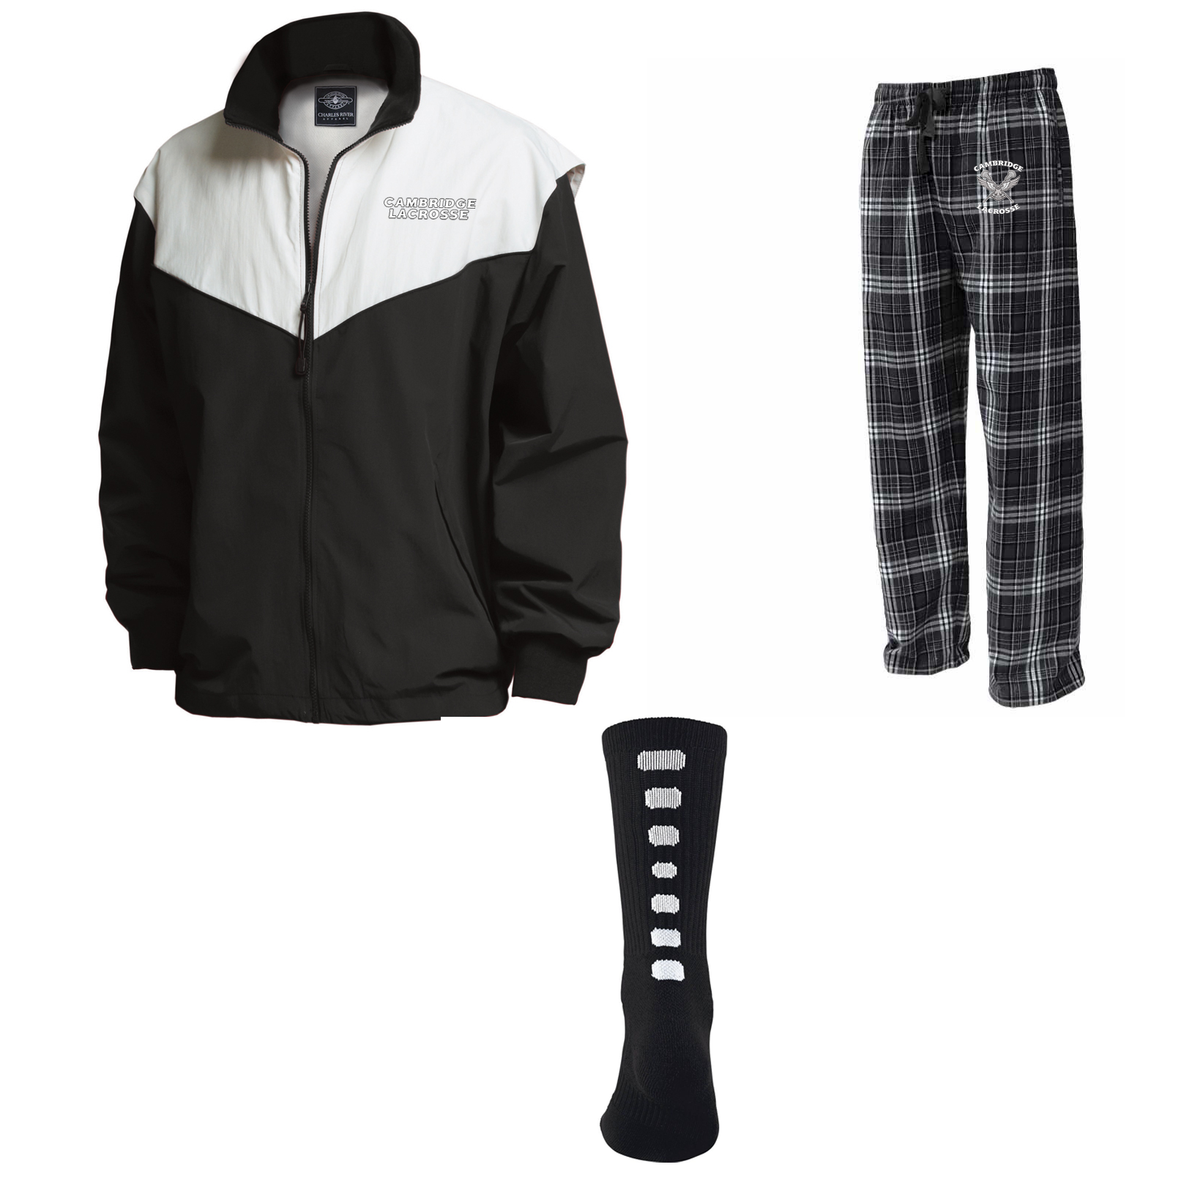 Cambridge Youth Lacrosse Player Pack: (Original price: $119.99) *Socks comes FREE*